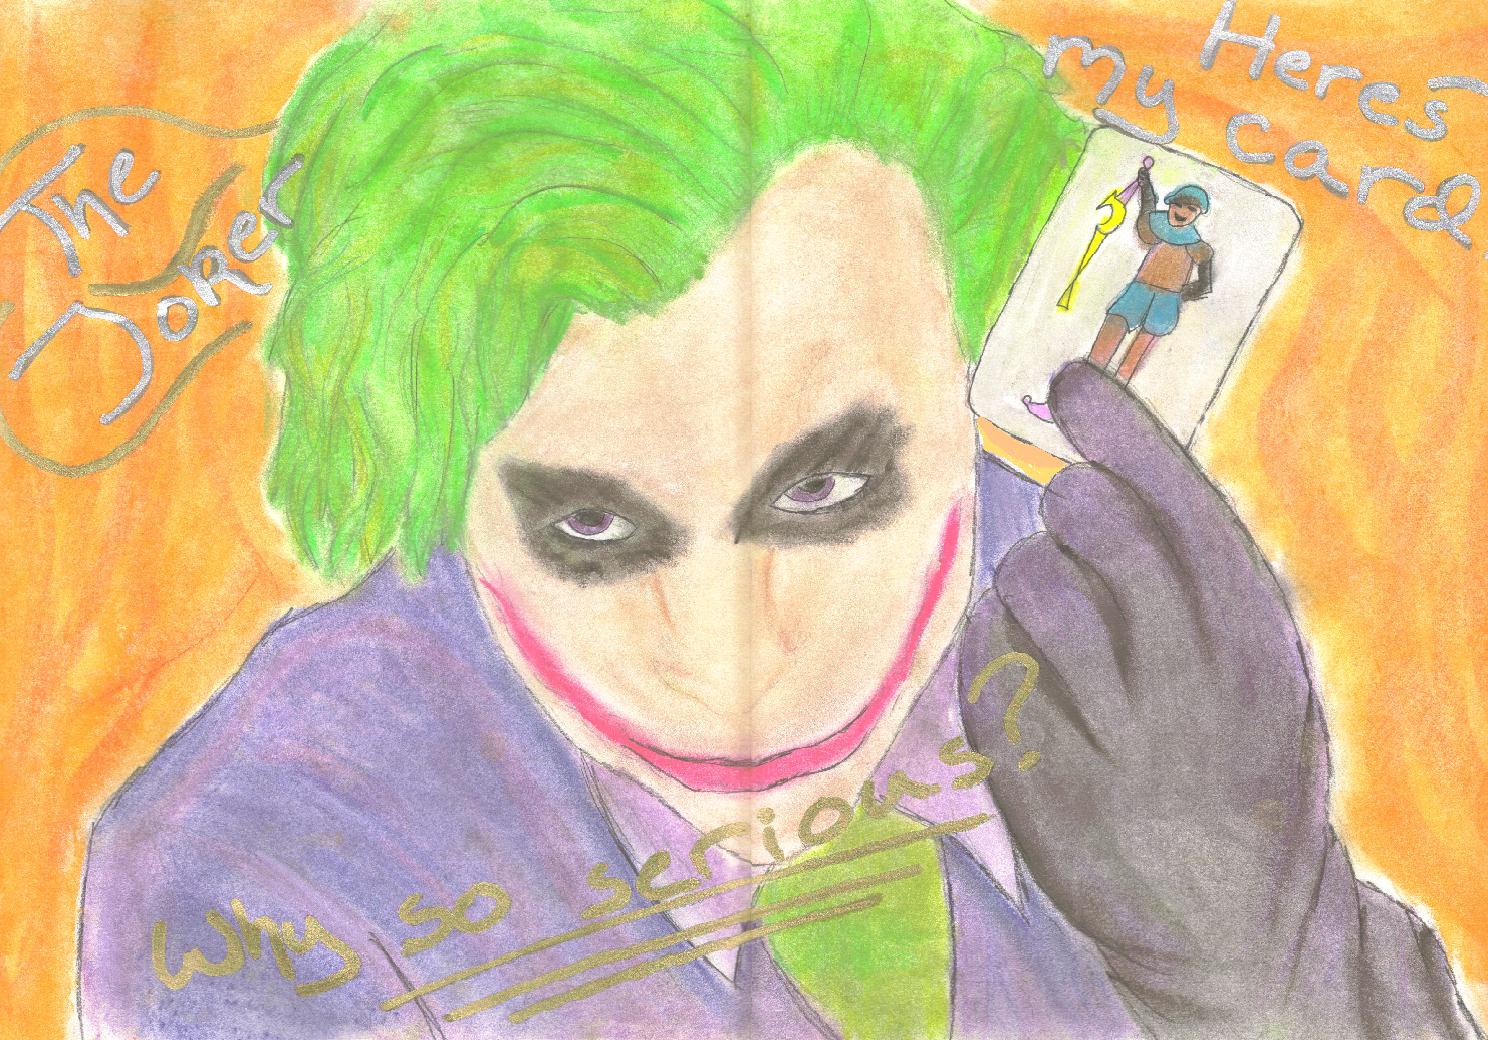 Why so serious? by Hamstar27